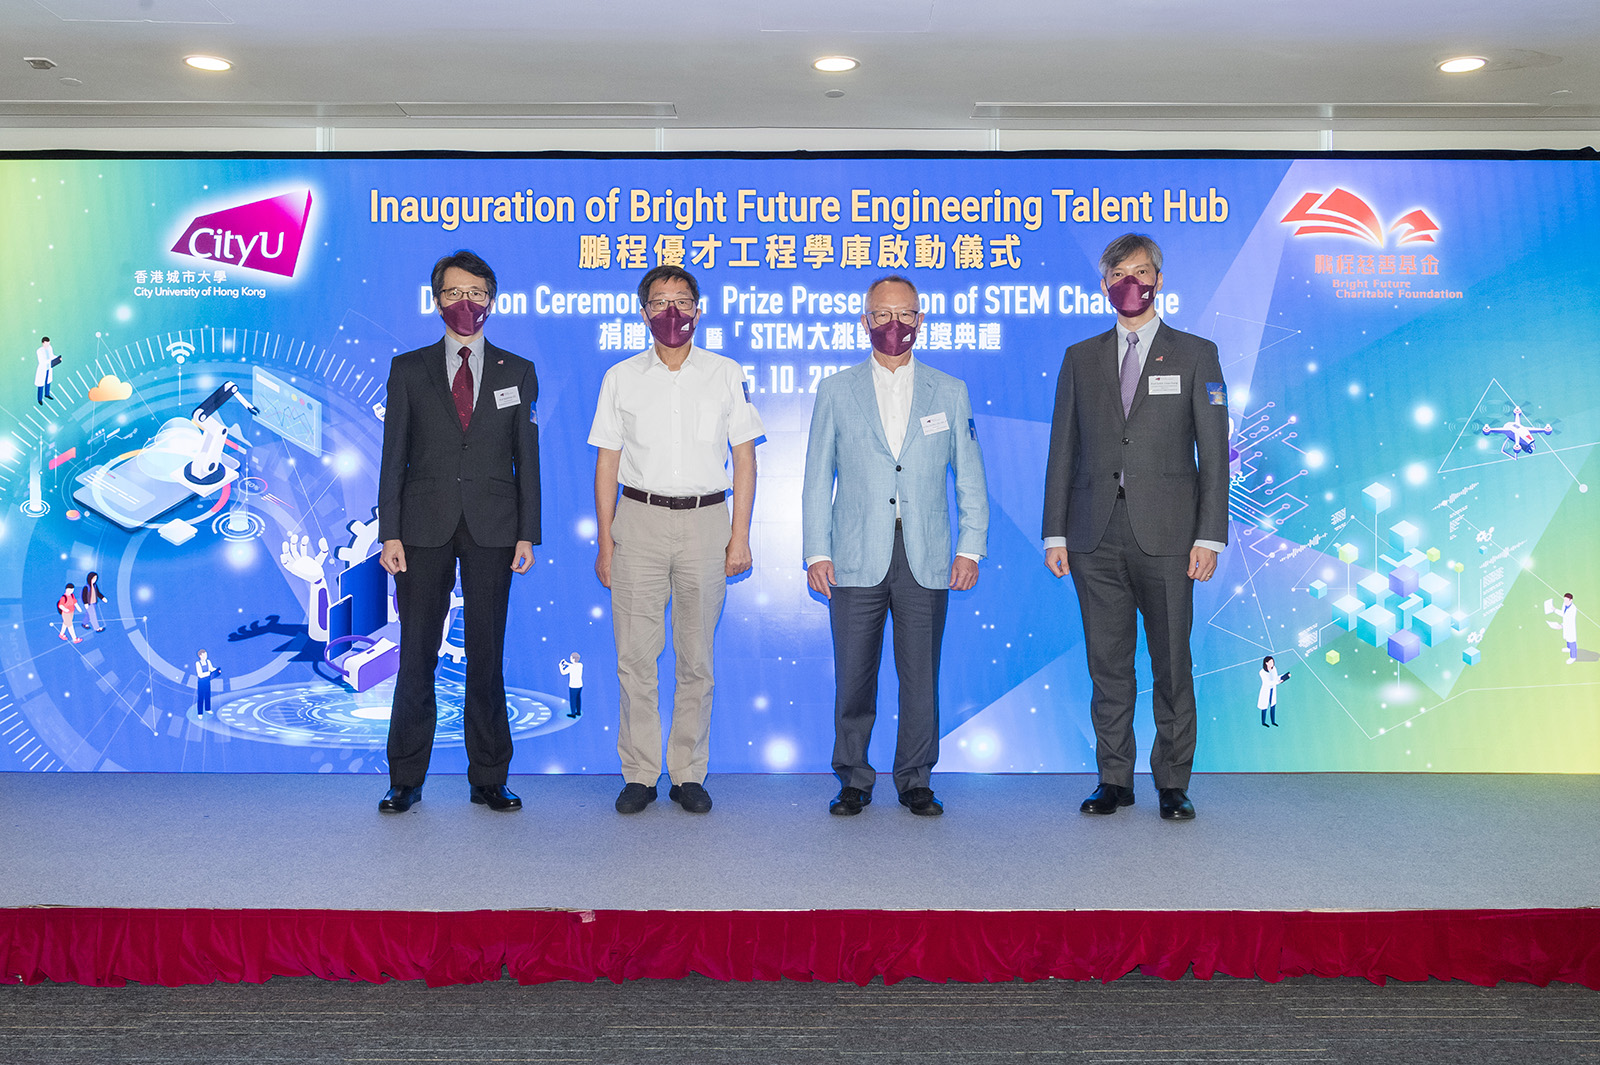 Bright Future Engineering Talent Hub officially inaugurated to nurture young engineering talent